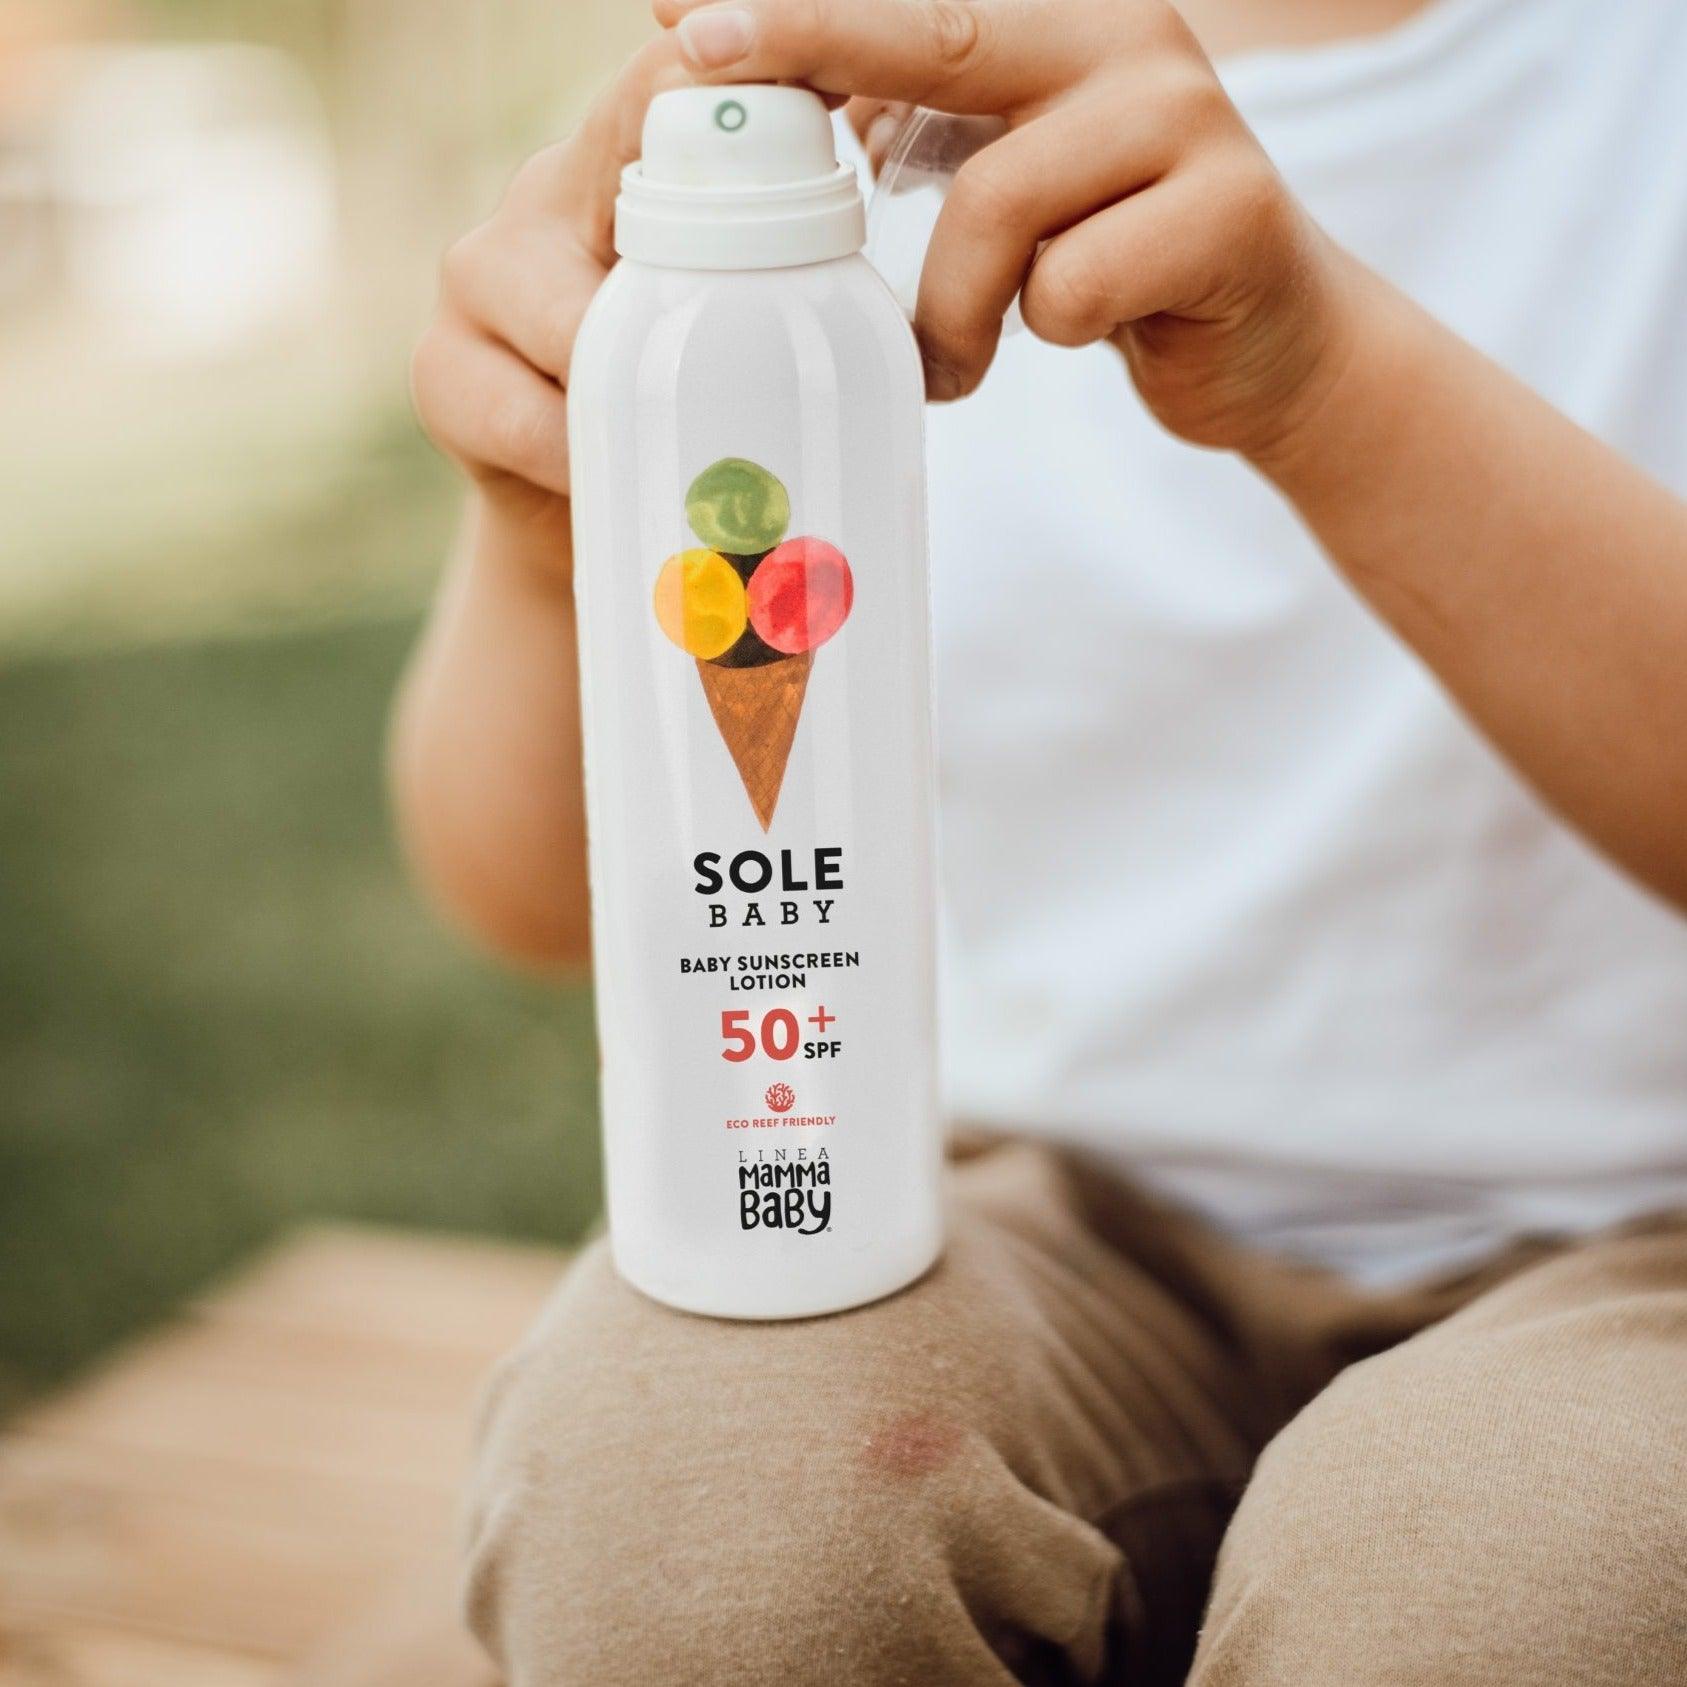 Linea Mammababy: Sohle Baby Eco Reef Sonnenschutzlotion SPF 50+